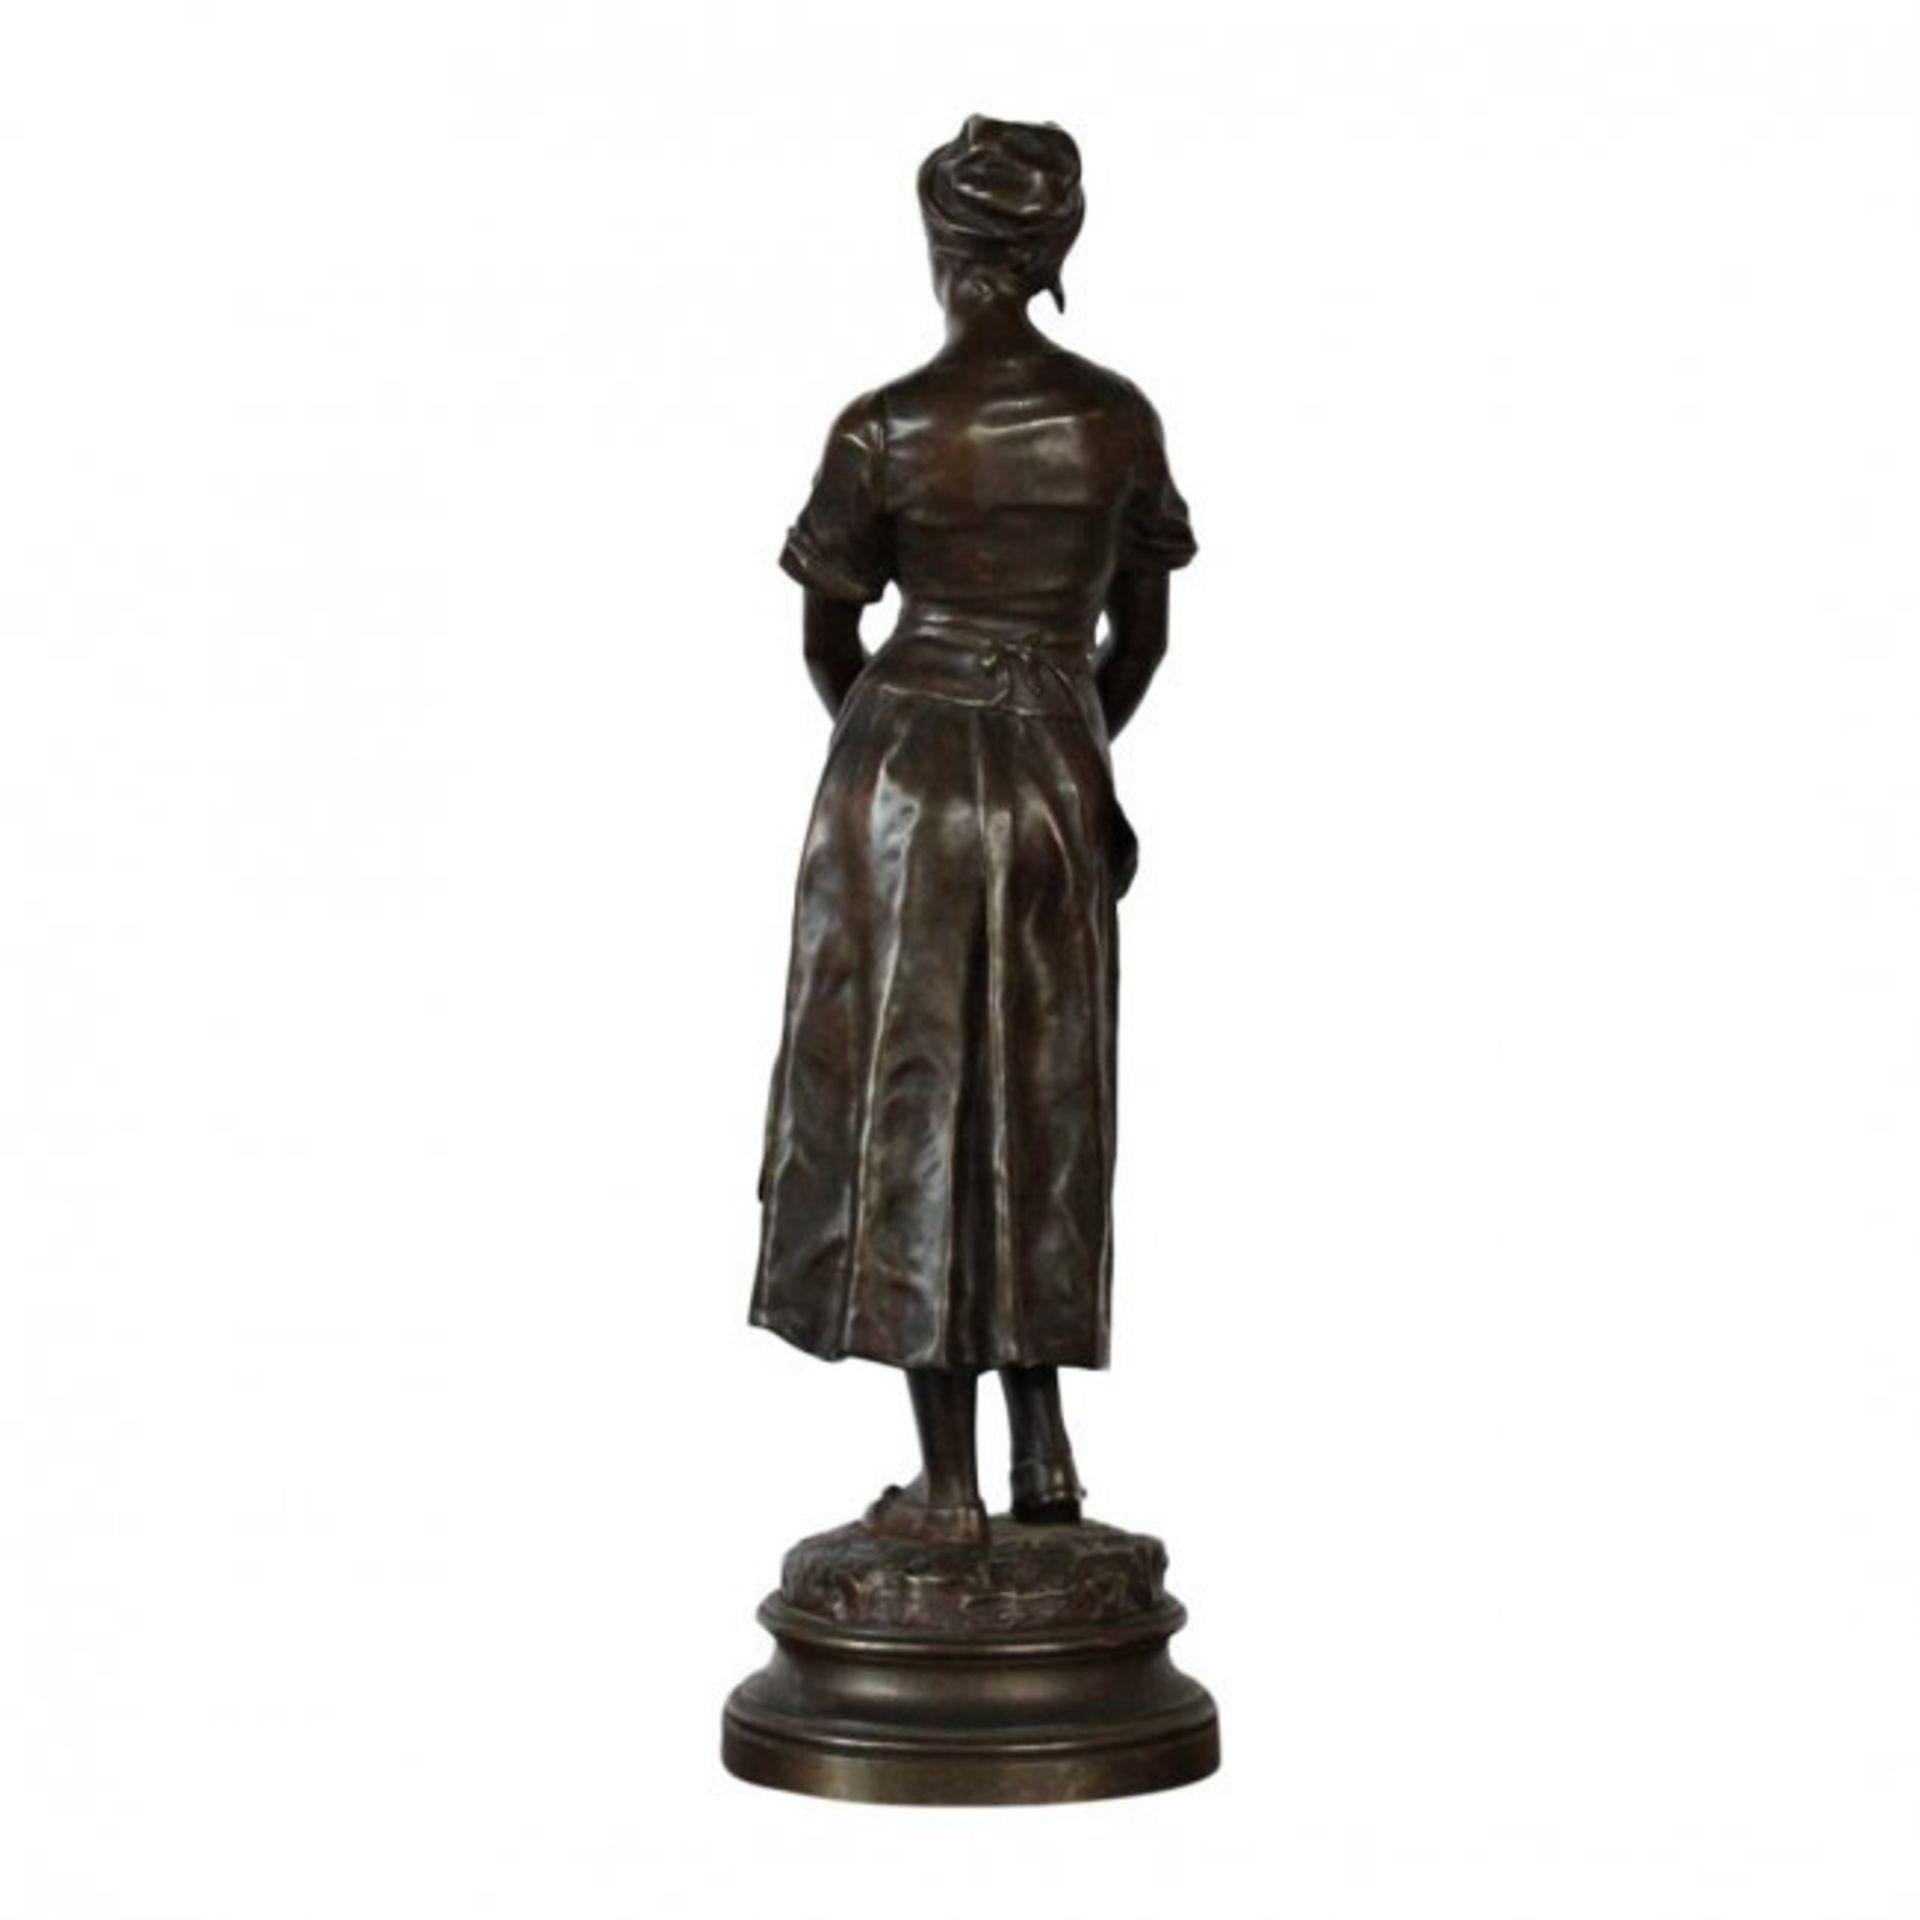 ANATOLE J. GUILLOT BRONZE SCULPTURE “WOMAN WITH... - Image 2 of 2